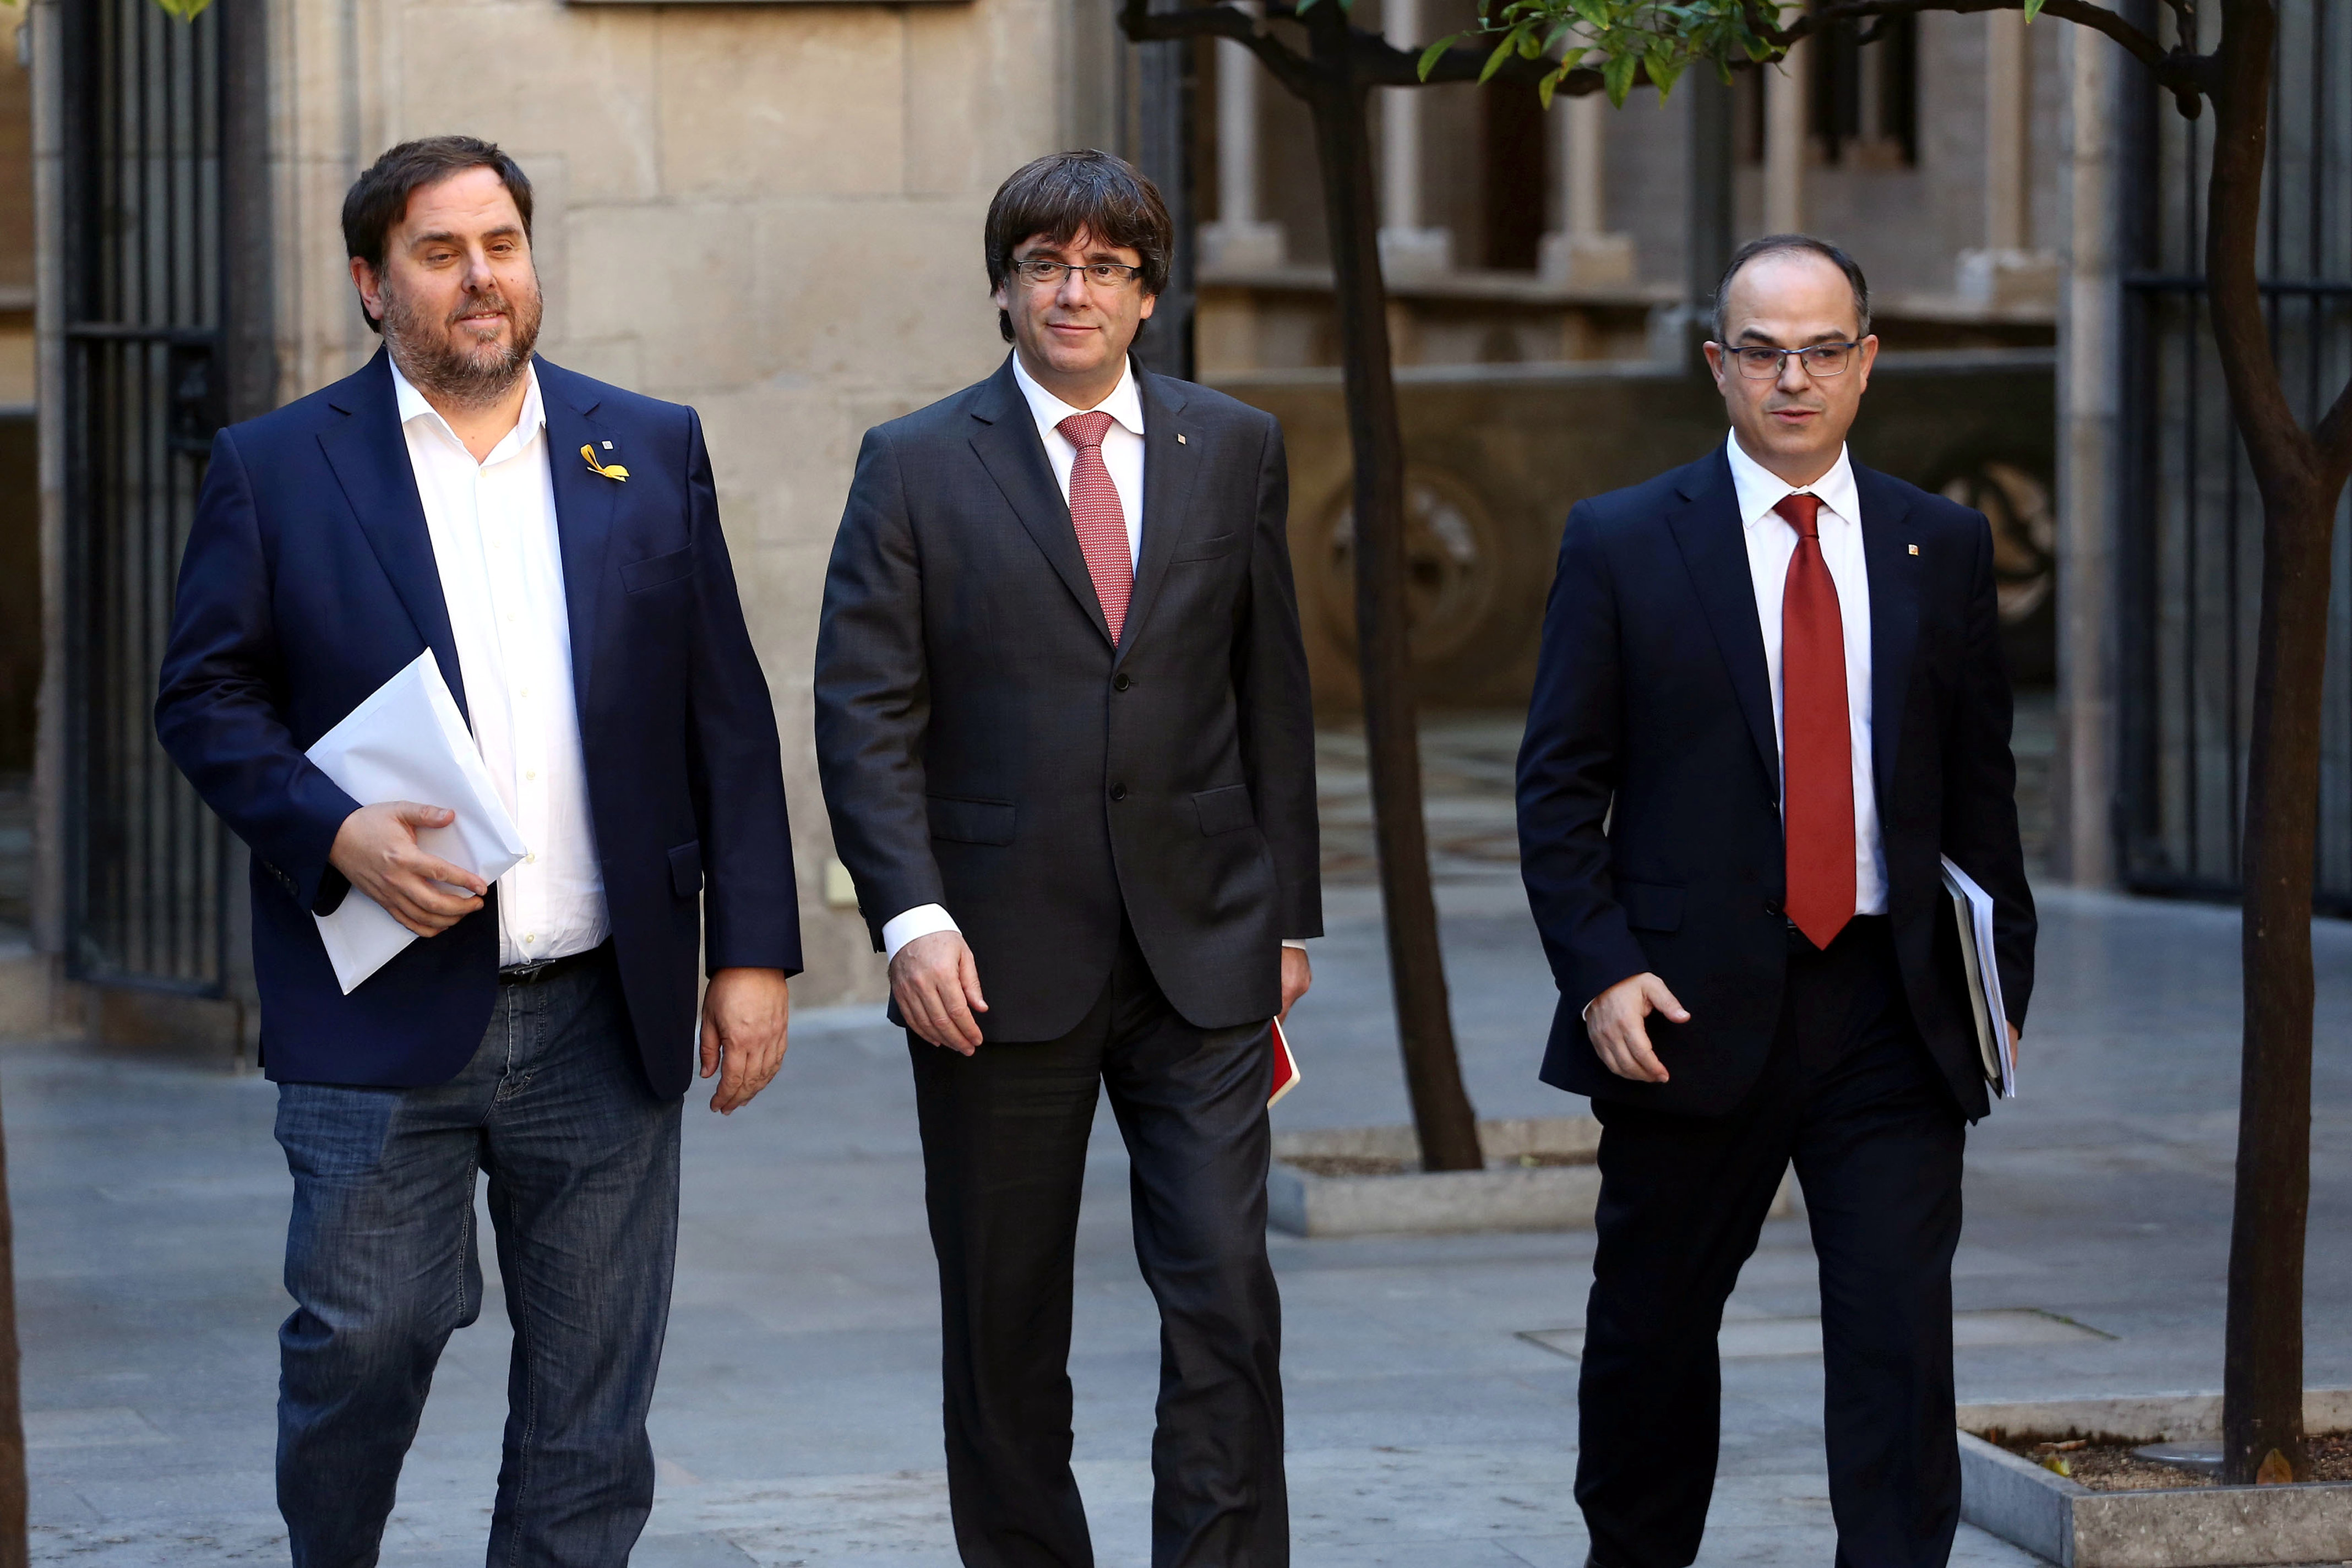 Oriol Junqueras, Carles Puigdemont, Jordi Turull walking towards a cabinet meeting on October 24 (by the Catalan government)